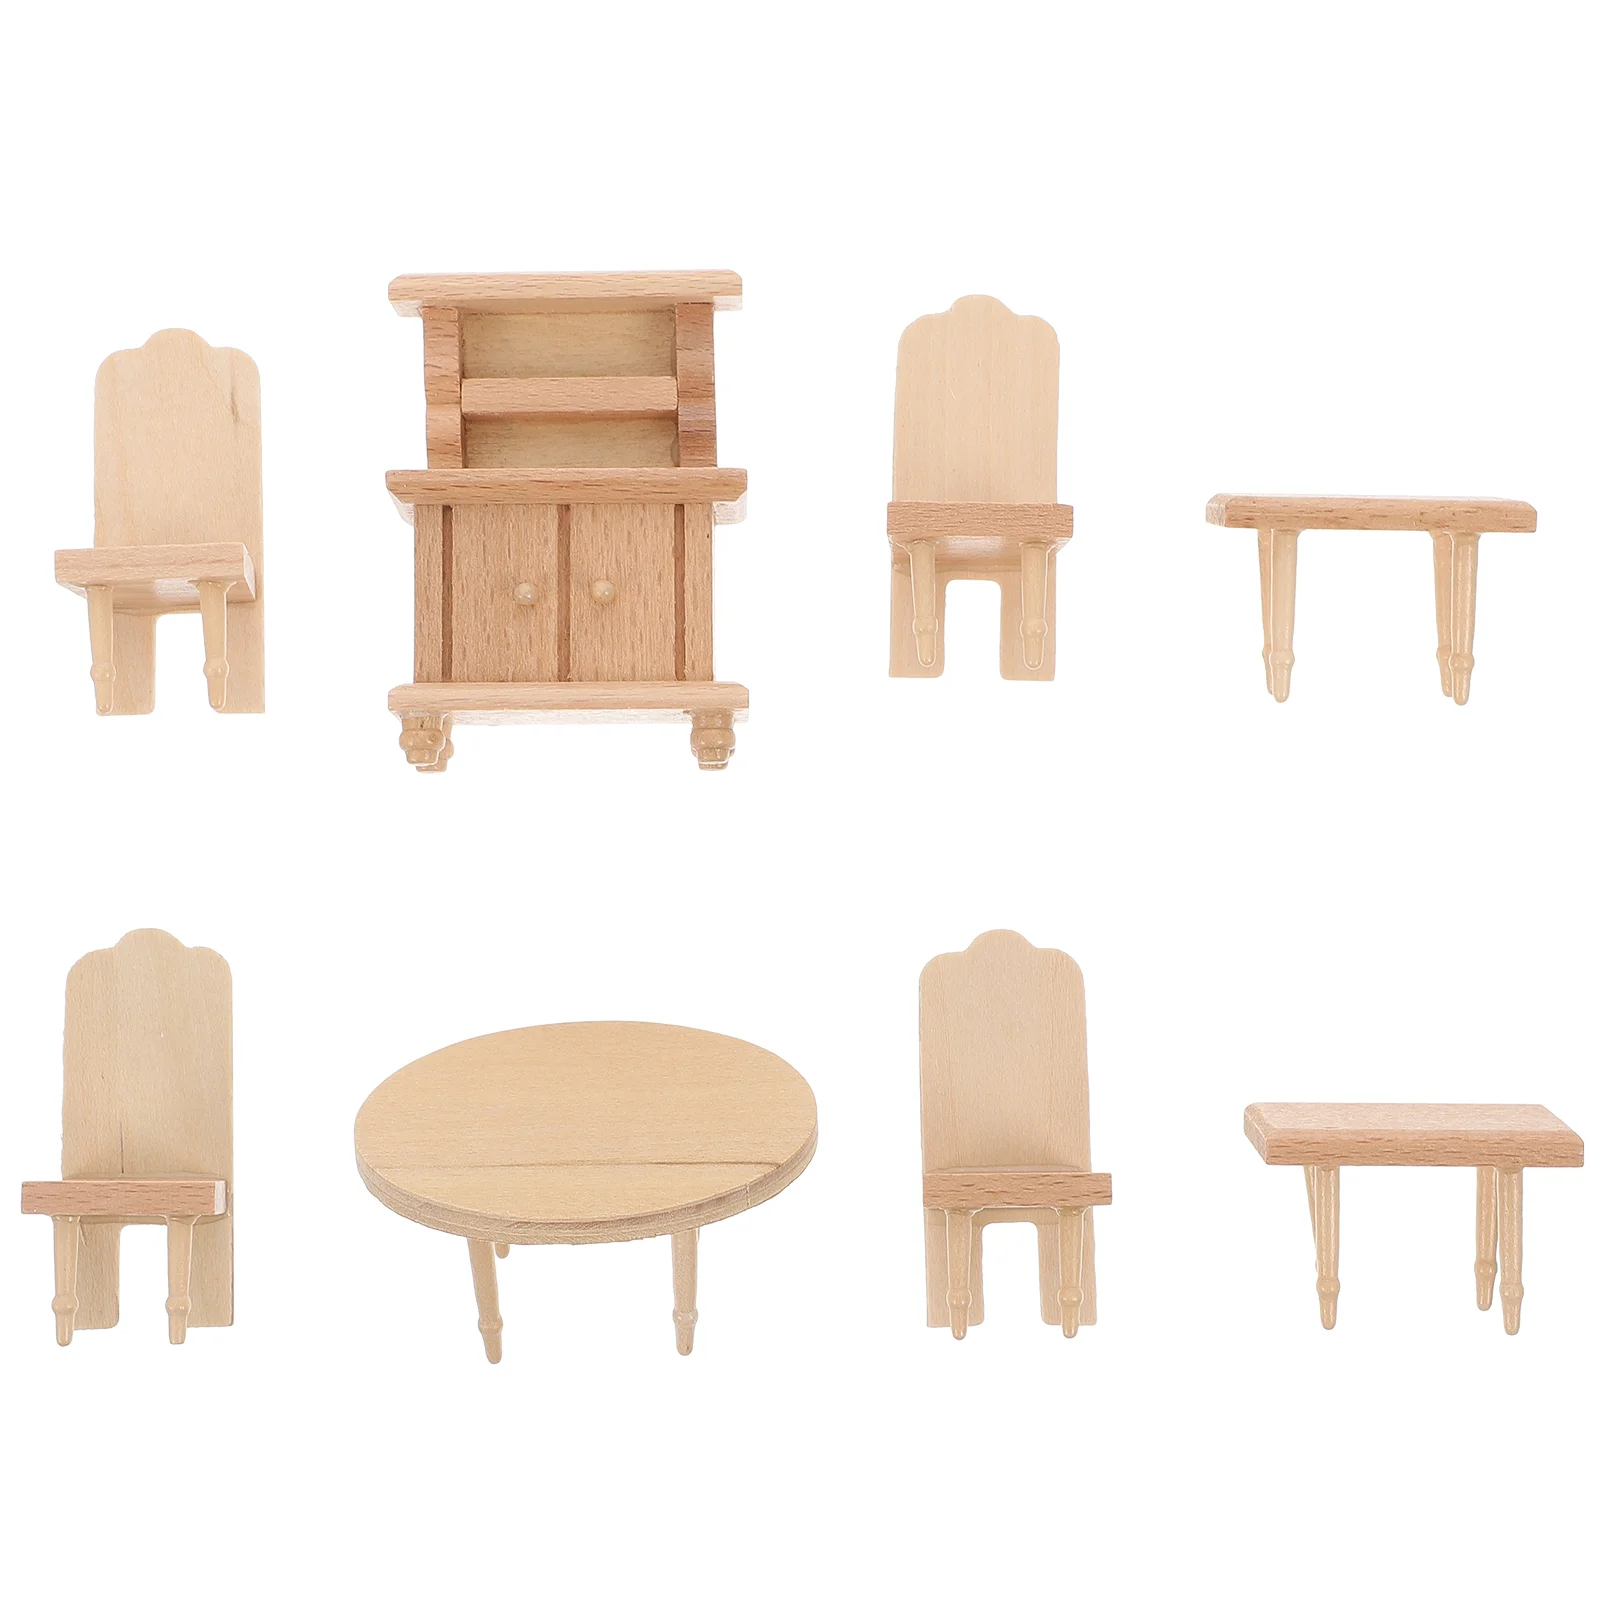 

Mini Table and Chairs Miniature Things Pretend Play Toys Models Kids Accessories Furniture Dollhouse Miniatures